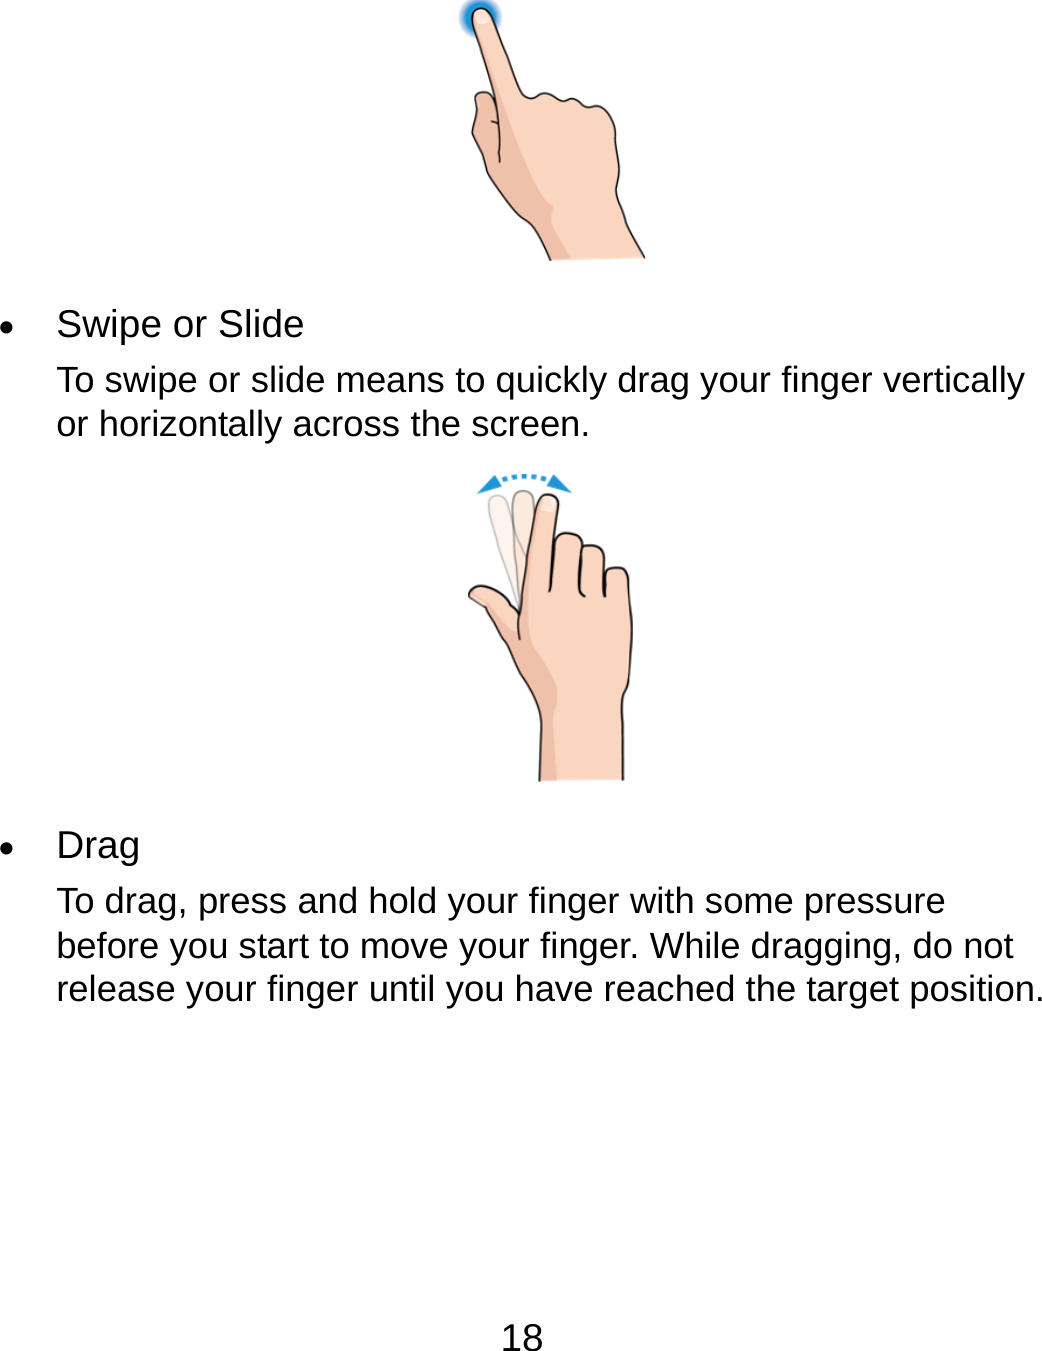 18   Swipe or Slide To swipe or slide means to quickly drag your finger vertically or horizontally across the screen.   Drag To drag, press and hold your finger with some pressure before you start to move your finger. While dragging, do not release your finger until you have reached the target position. 